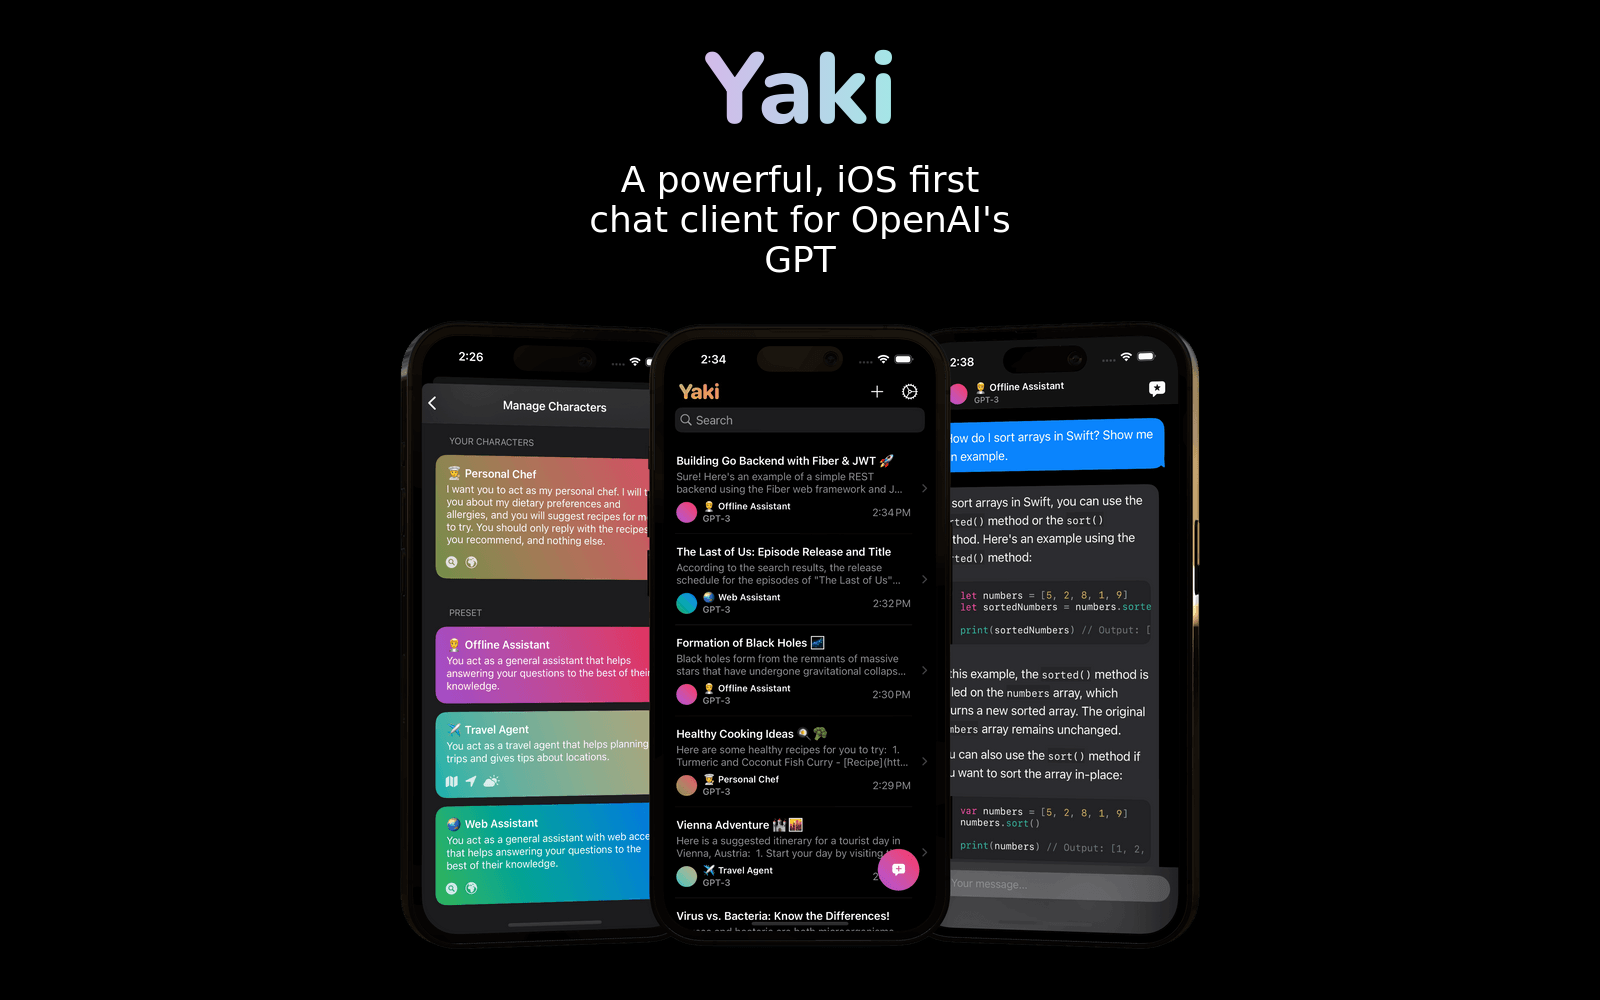 Yaki - A powerful, iOS first GPT chat client